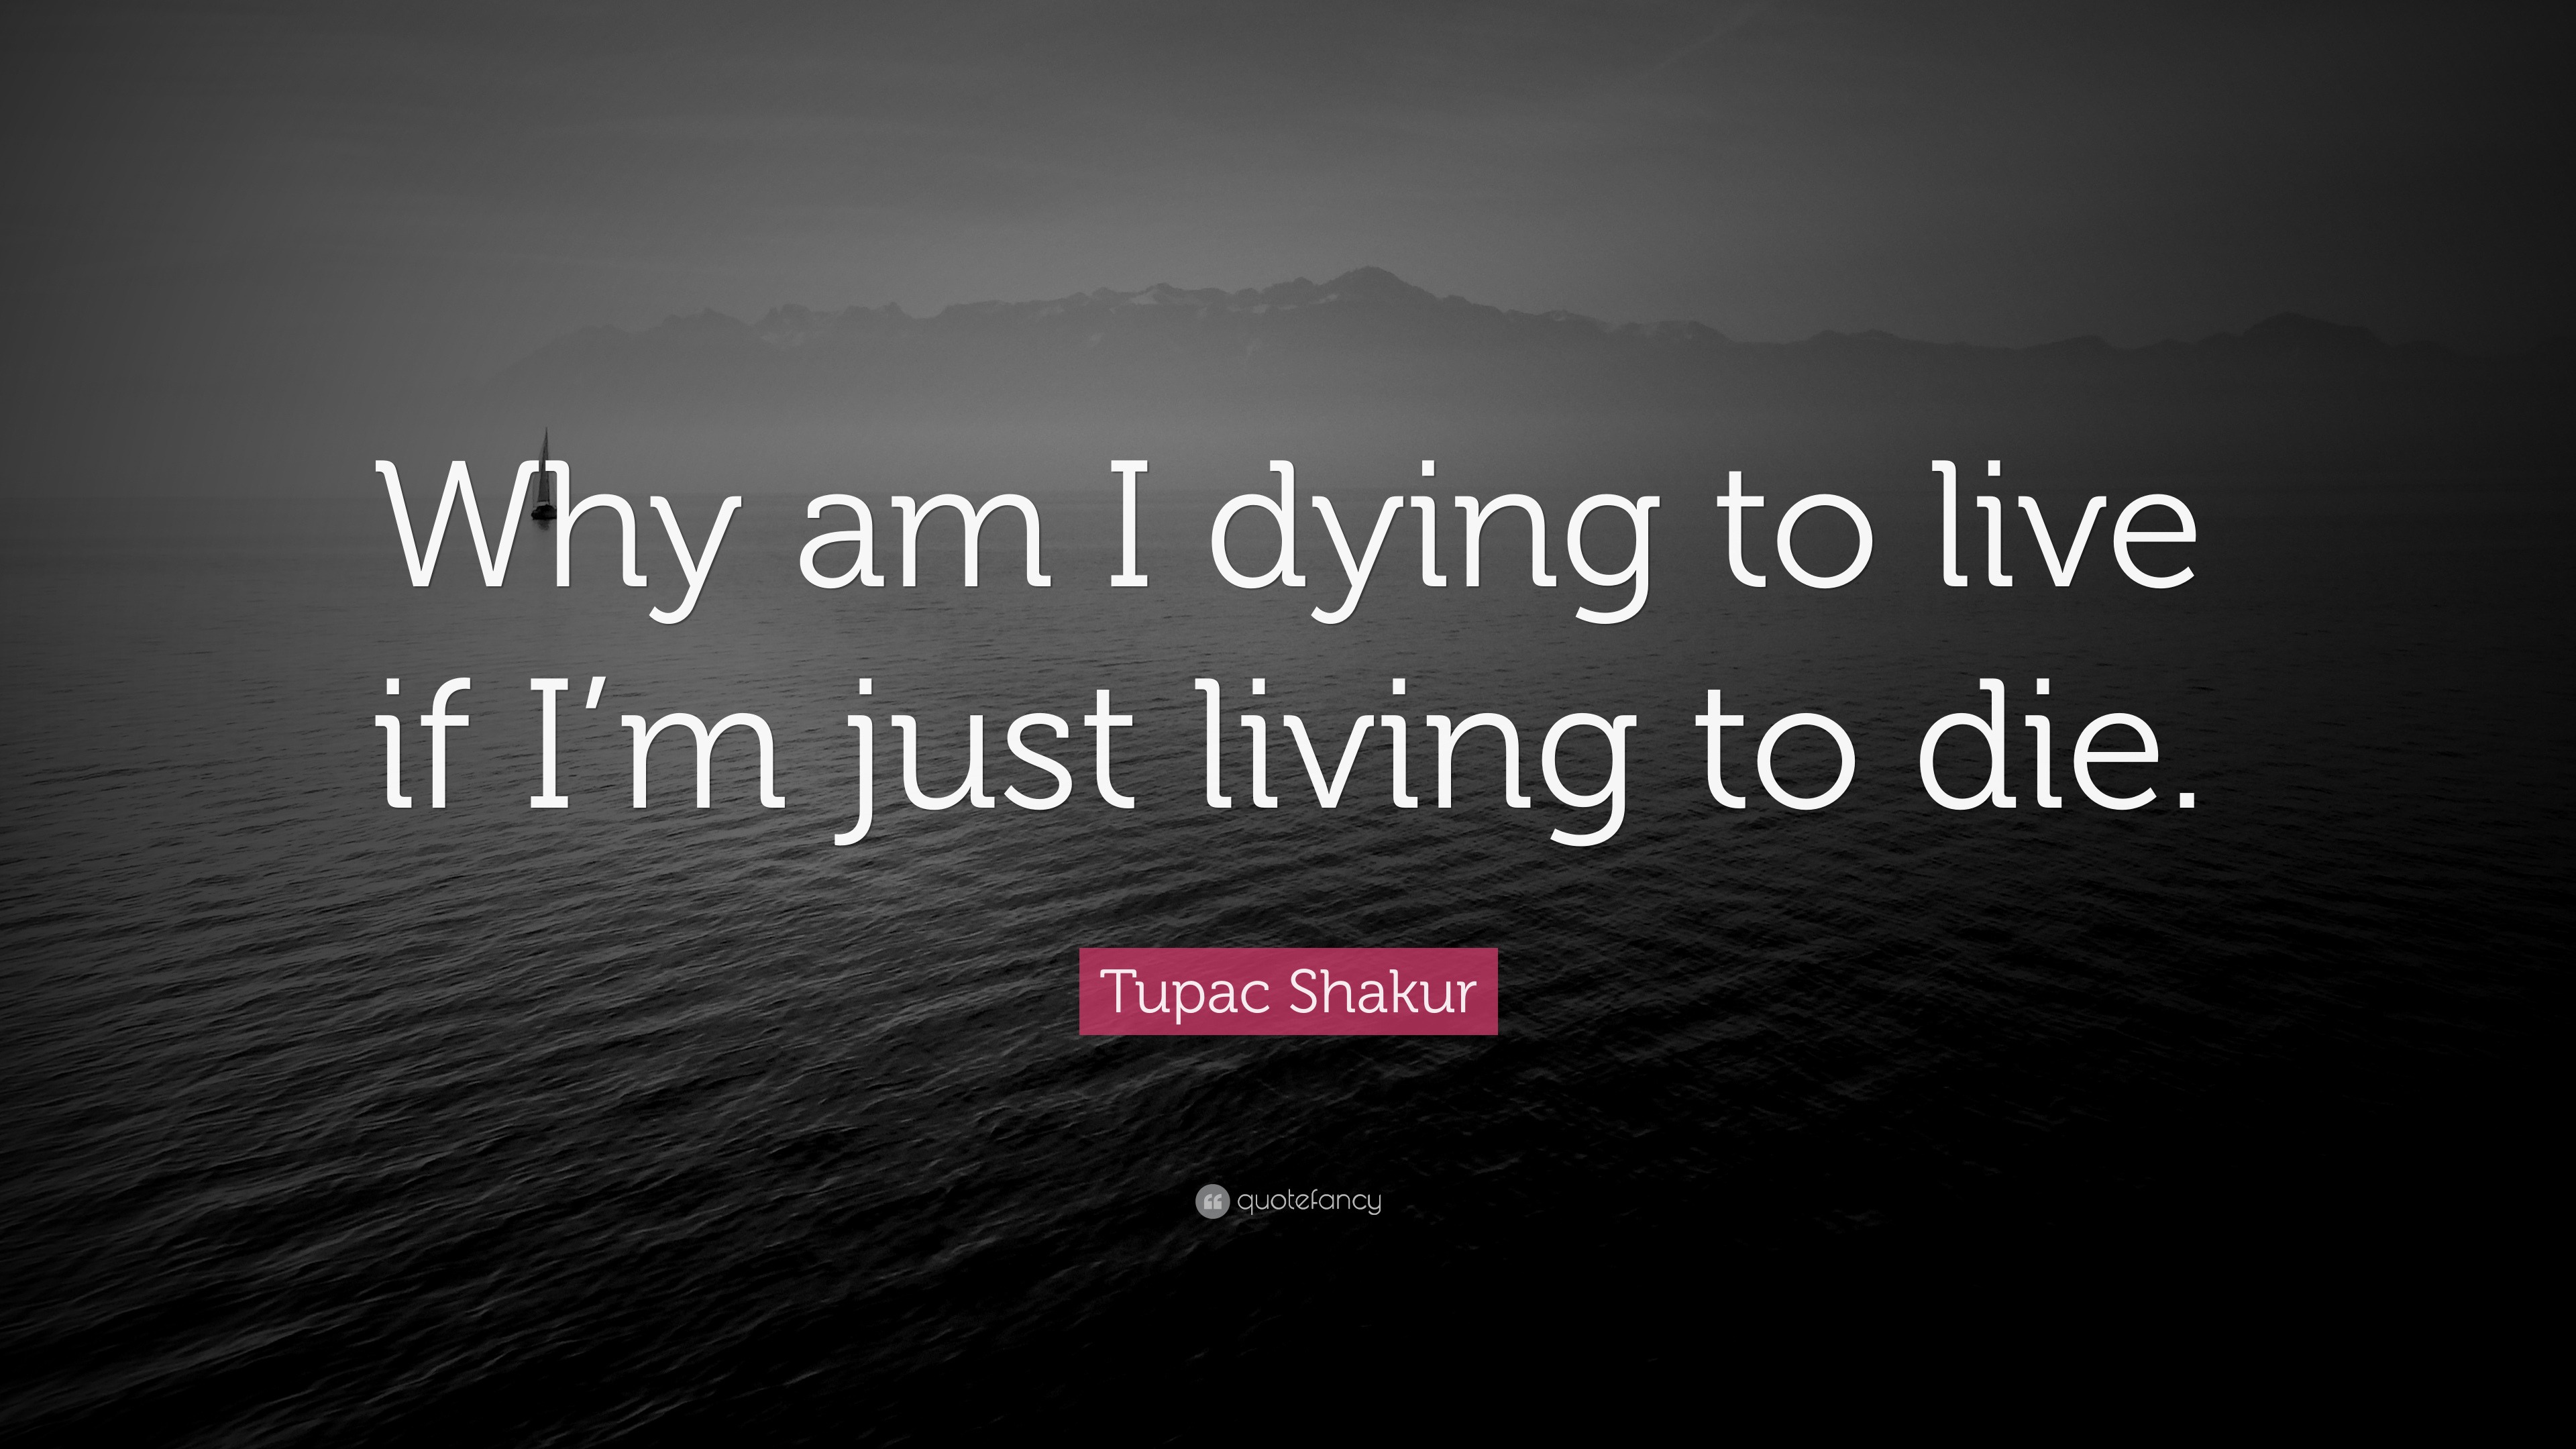 Реферат: Living To Die Or Dieing To Live